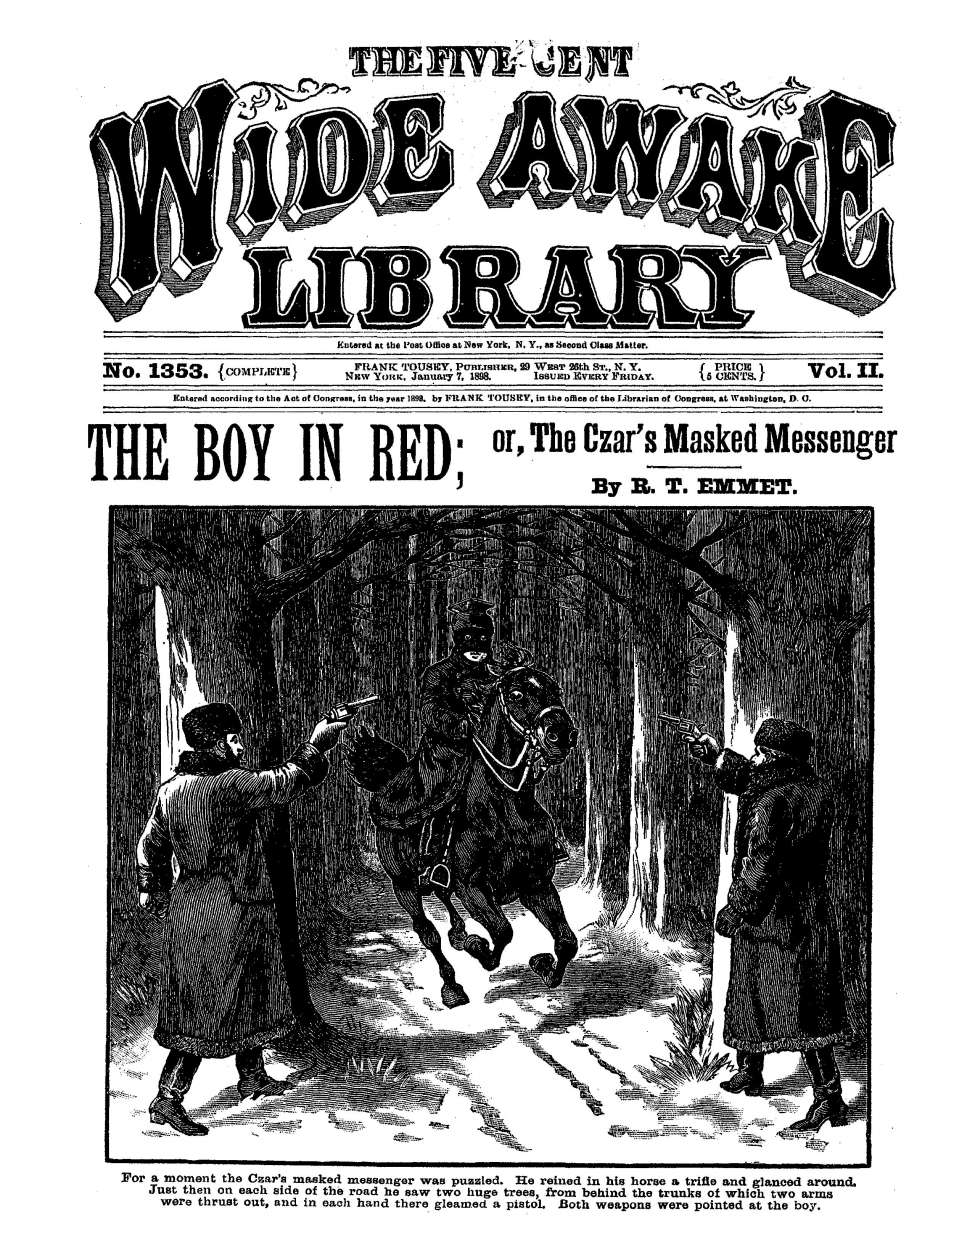 Comic Book Cover For Five Cent Wide Awake Library v2 1353